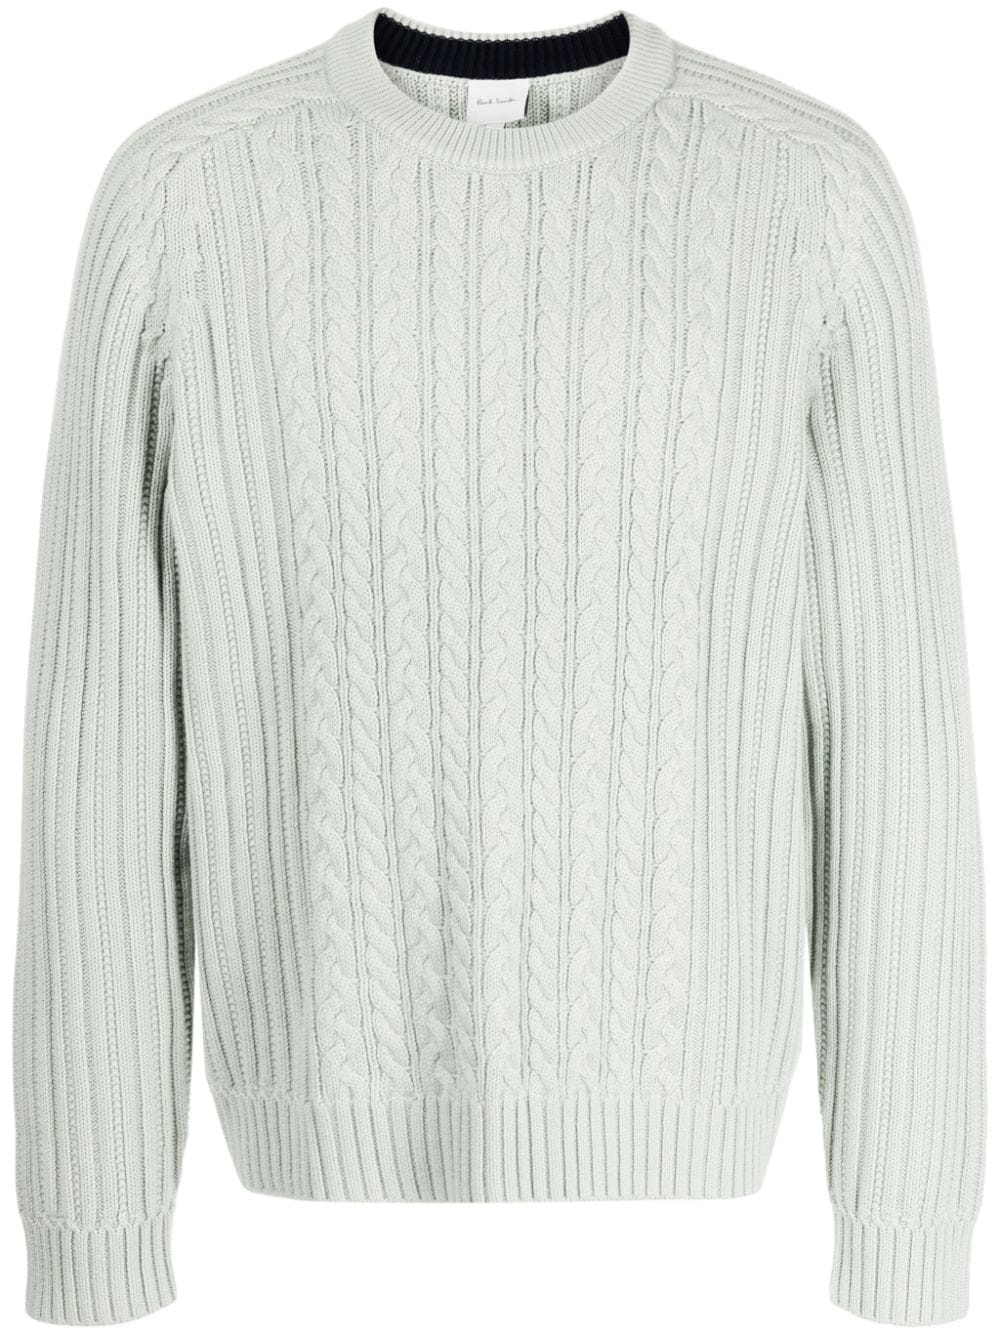 Paul Smith ribbed-trim cable-knit jumper - Grey von Paul Smith